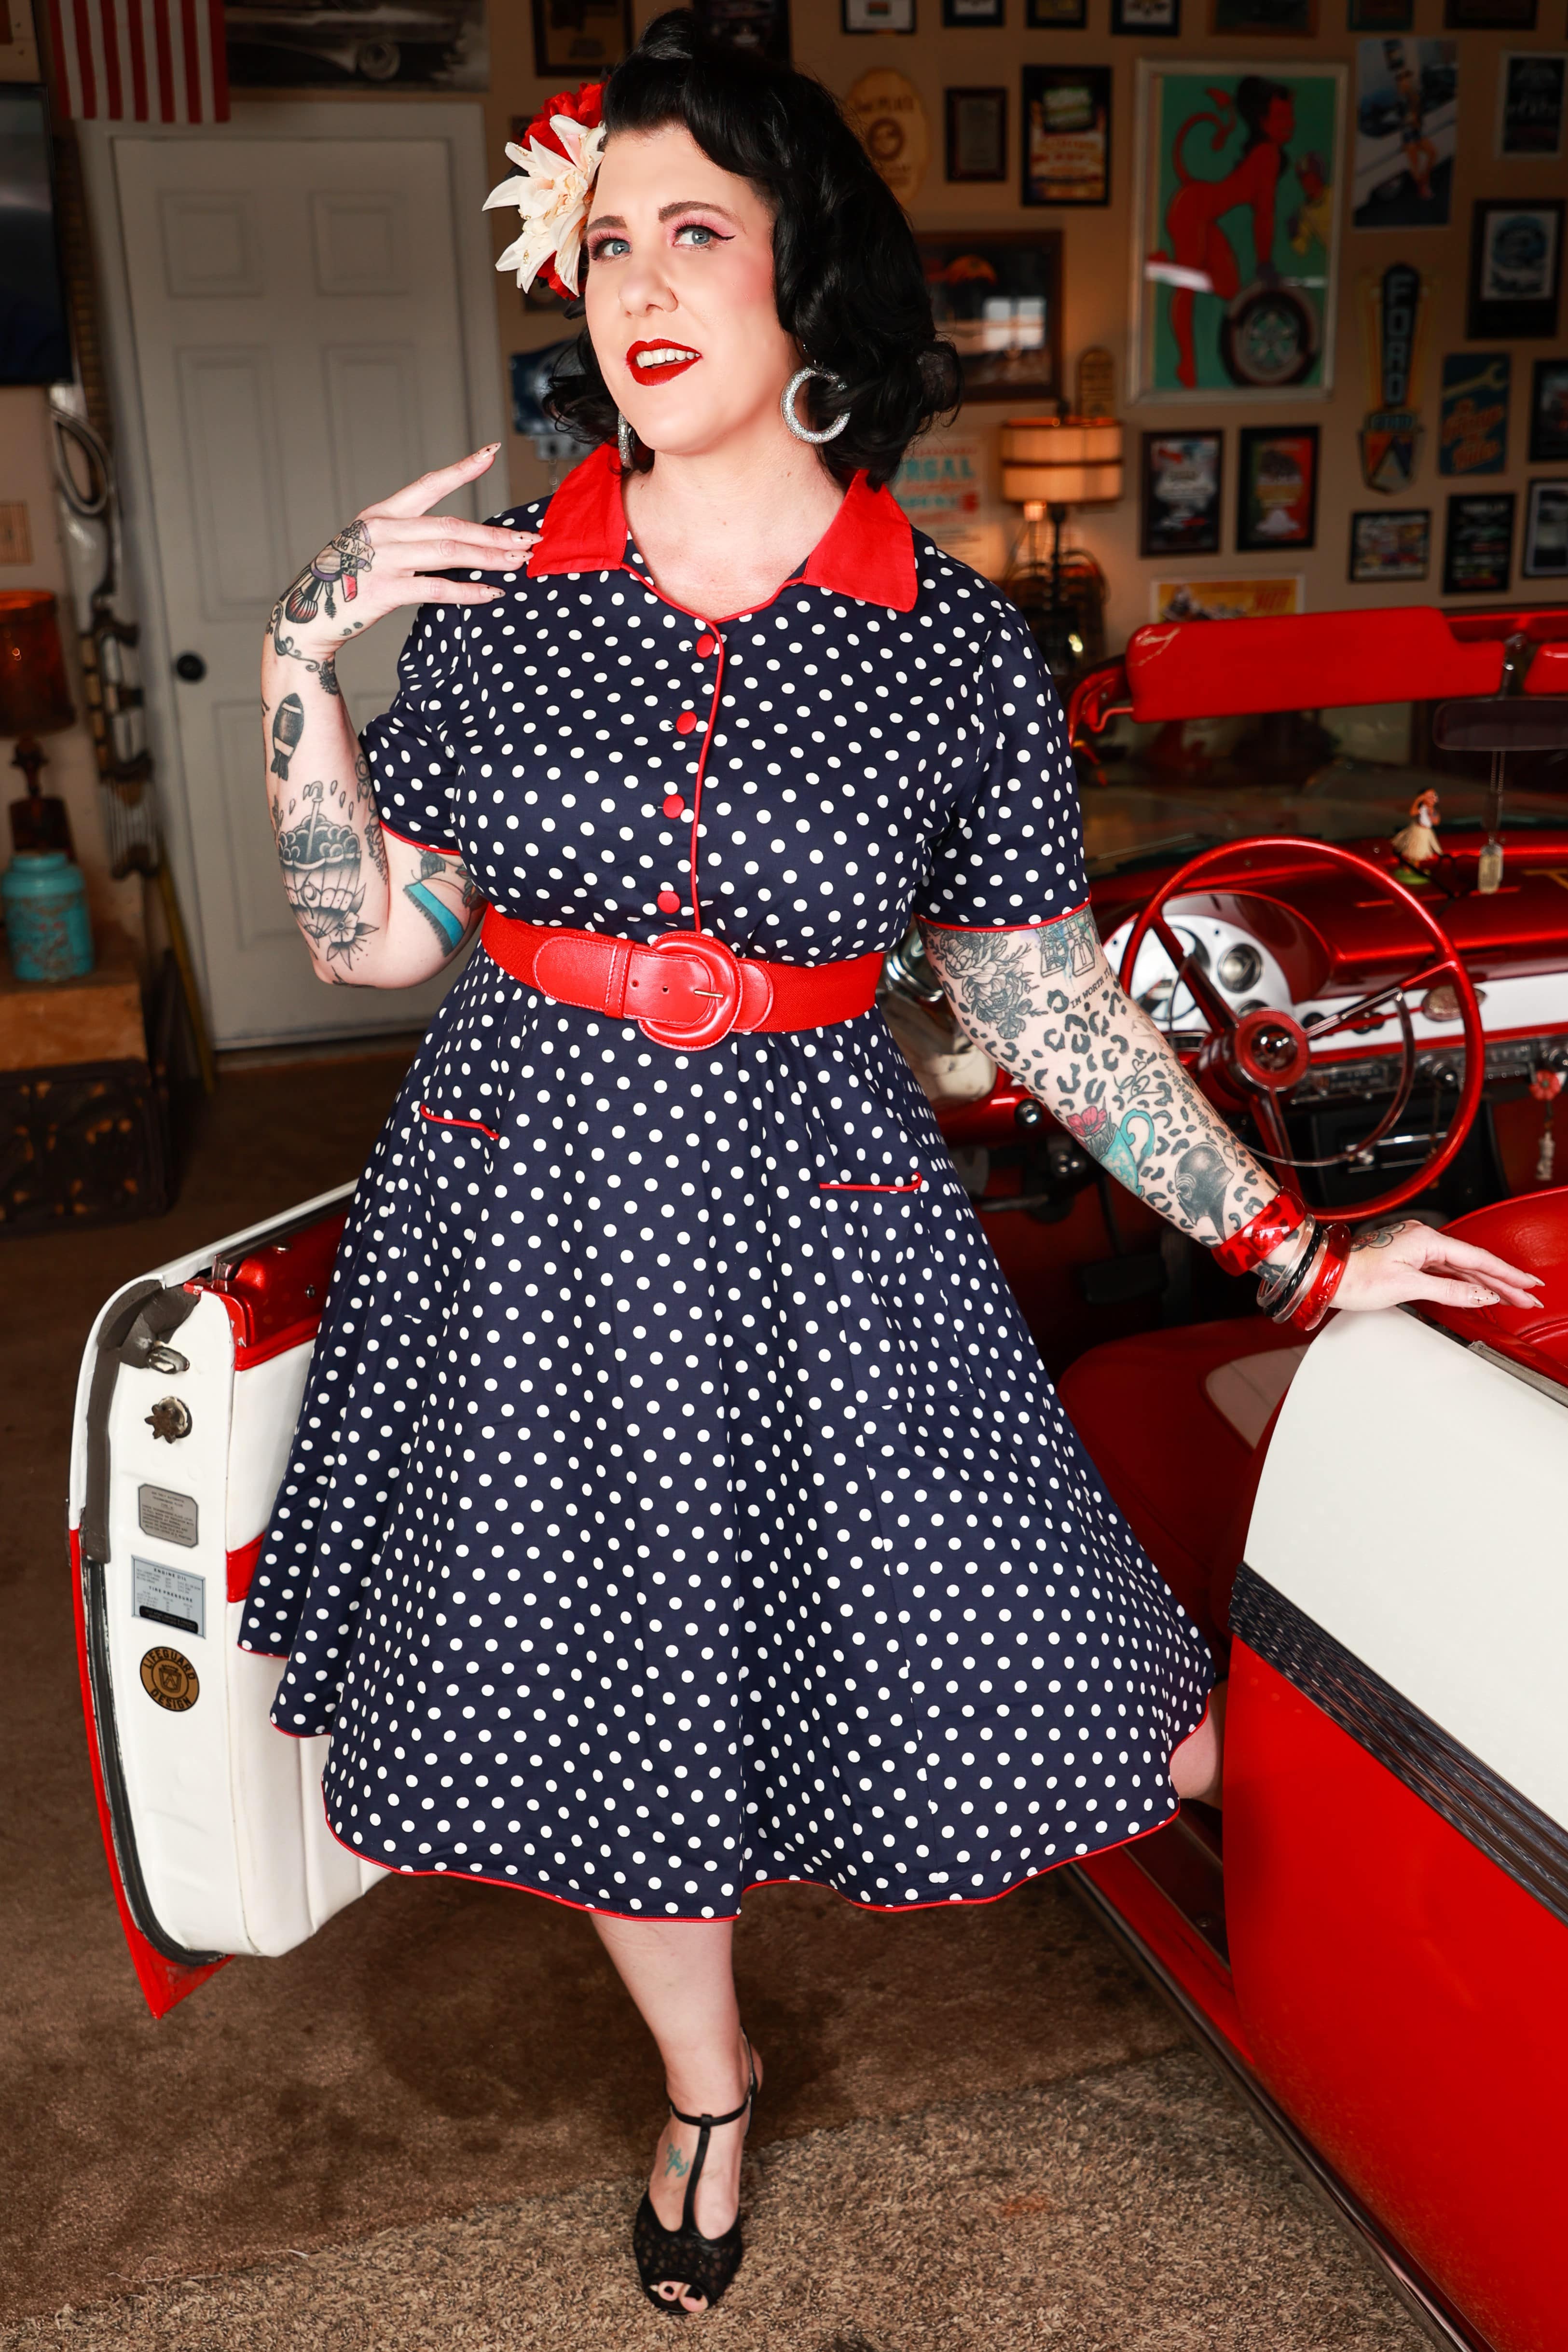 Idol Usikker Tilsvarende Plus Size Vintage Dresses and Clothing by Dolly and Dotty